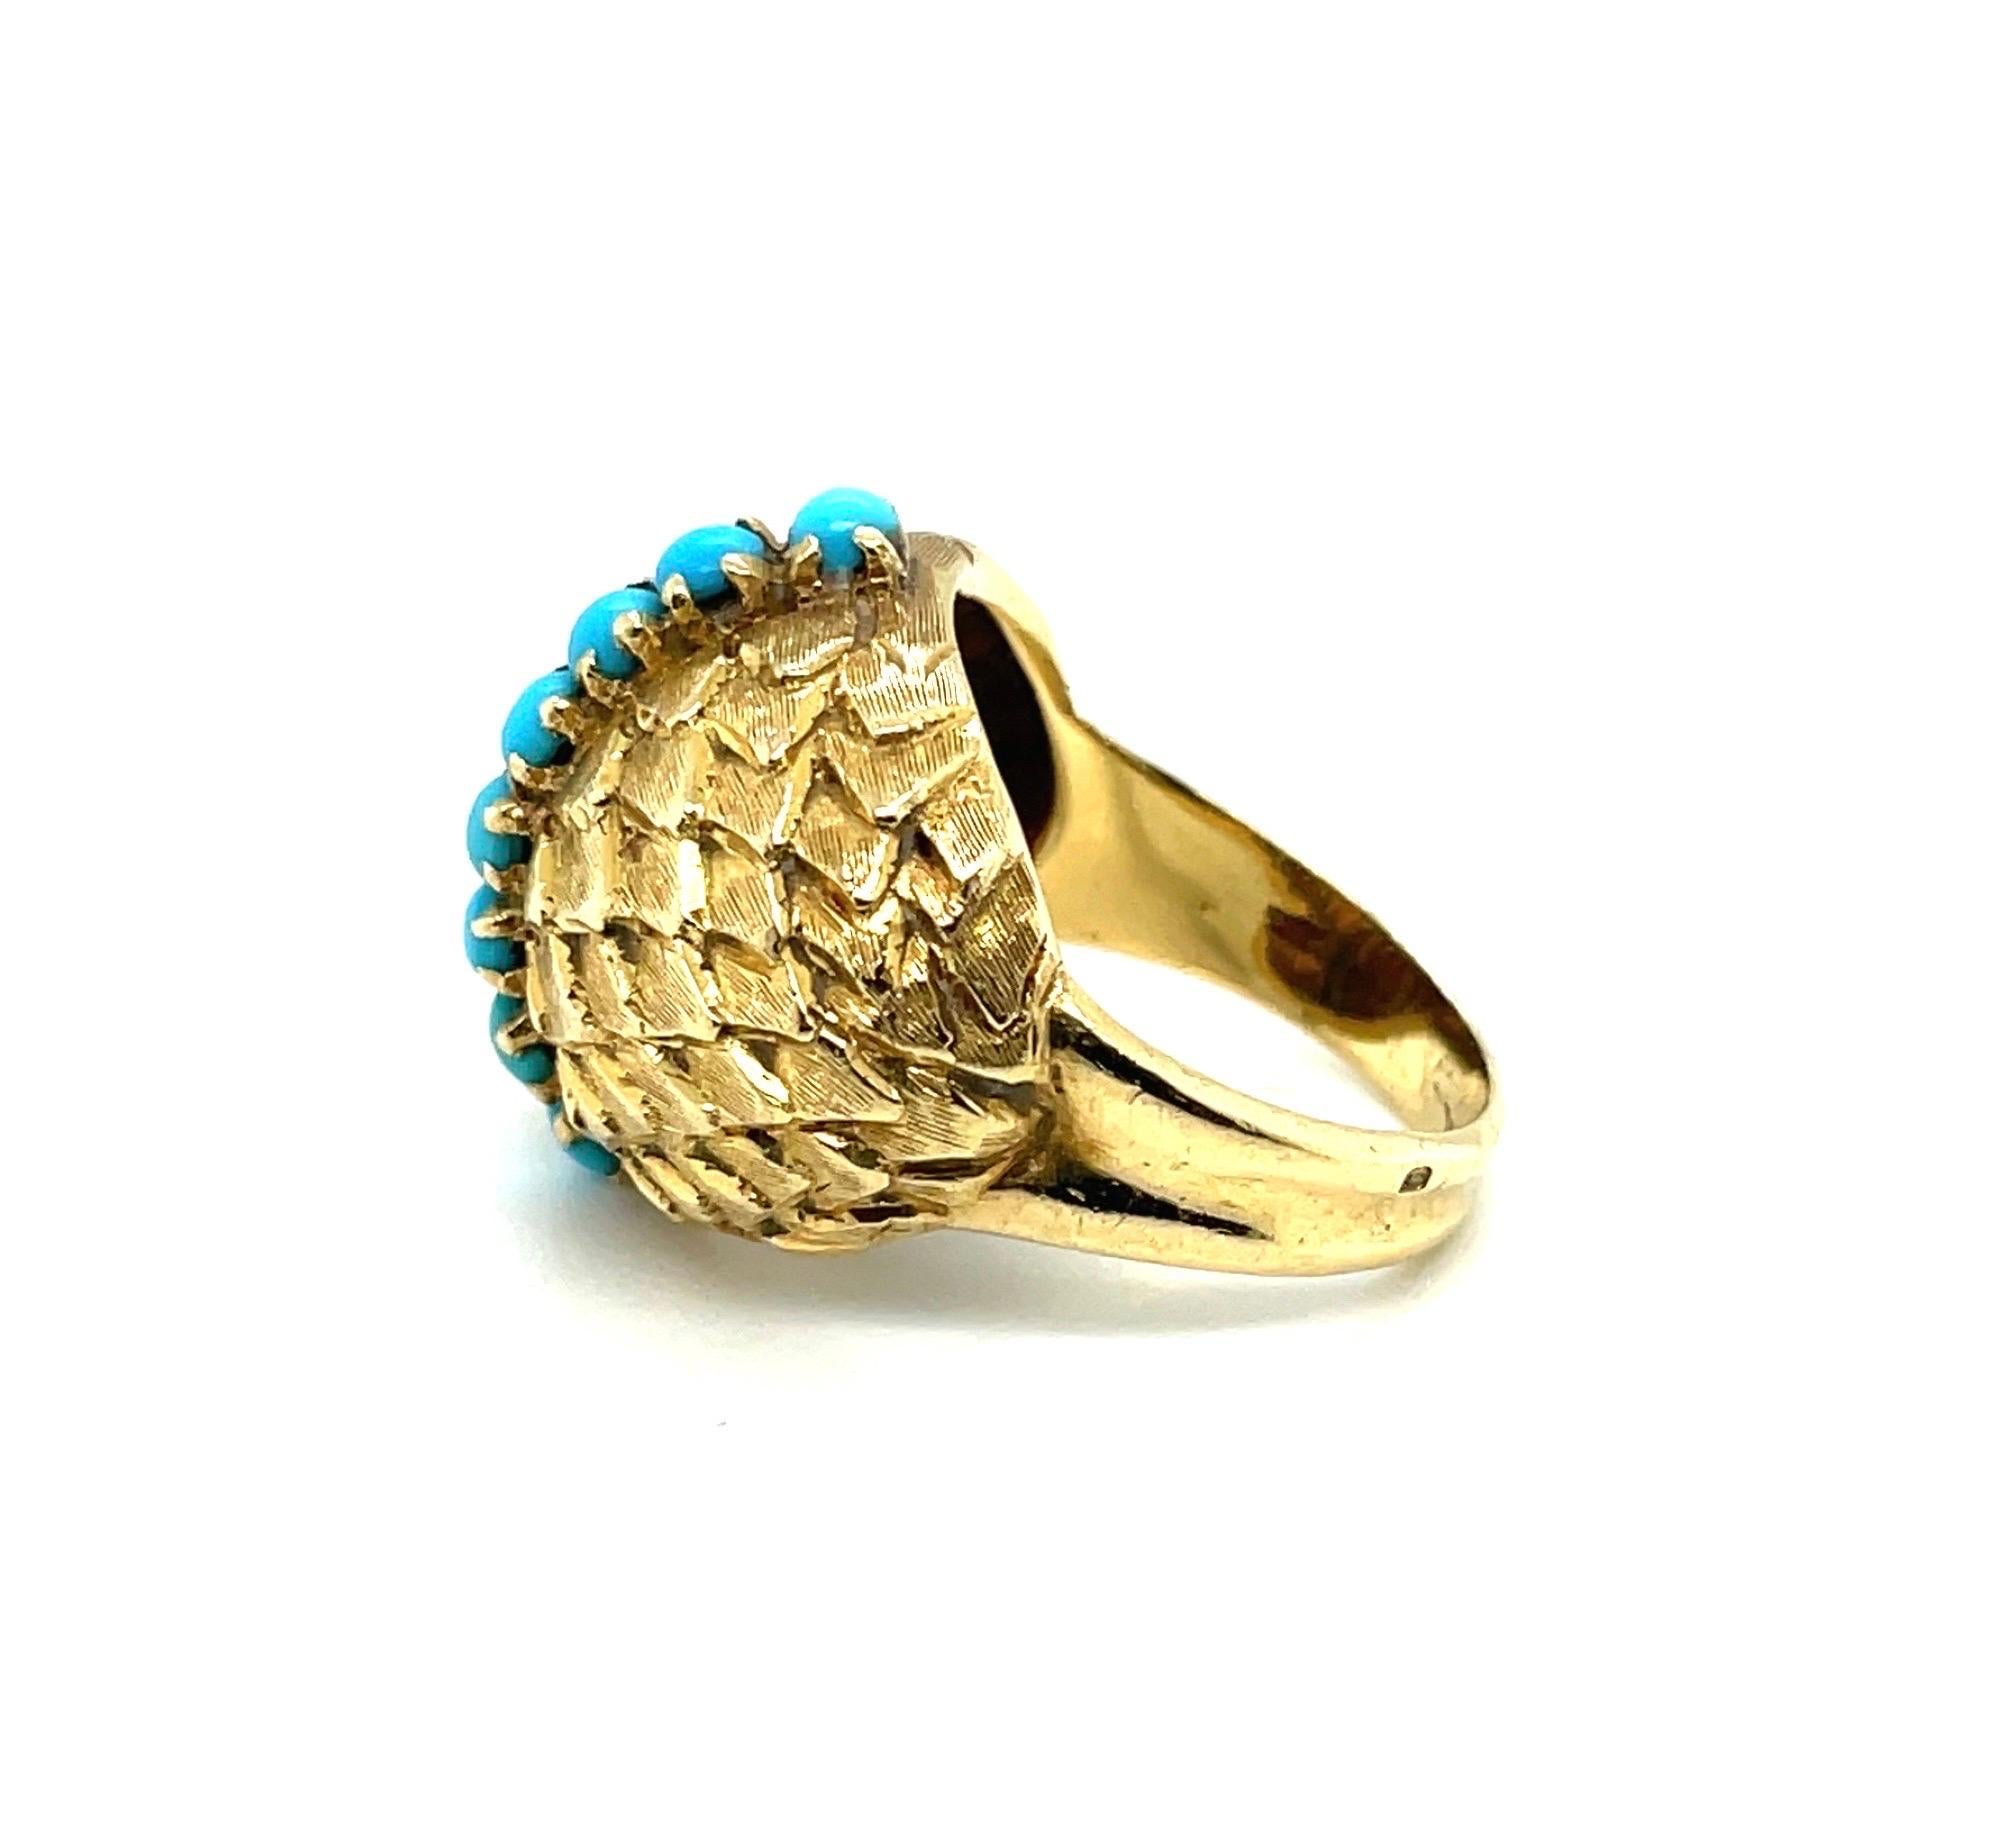 Cabochon 18 Karat Yellow Gold and Turquoise Cocktail Ring circa 1950s For Sale